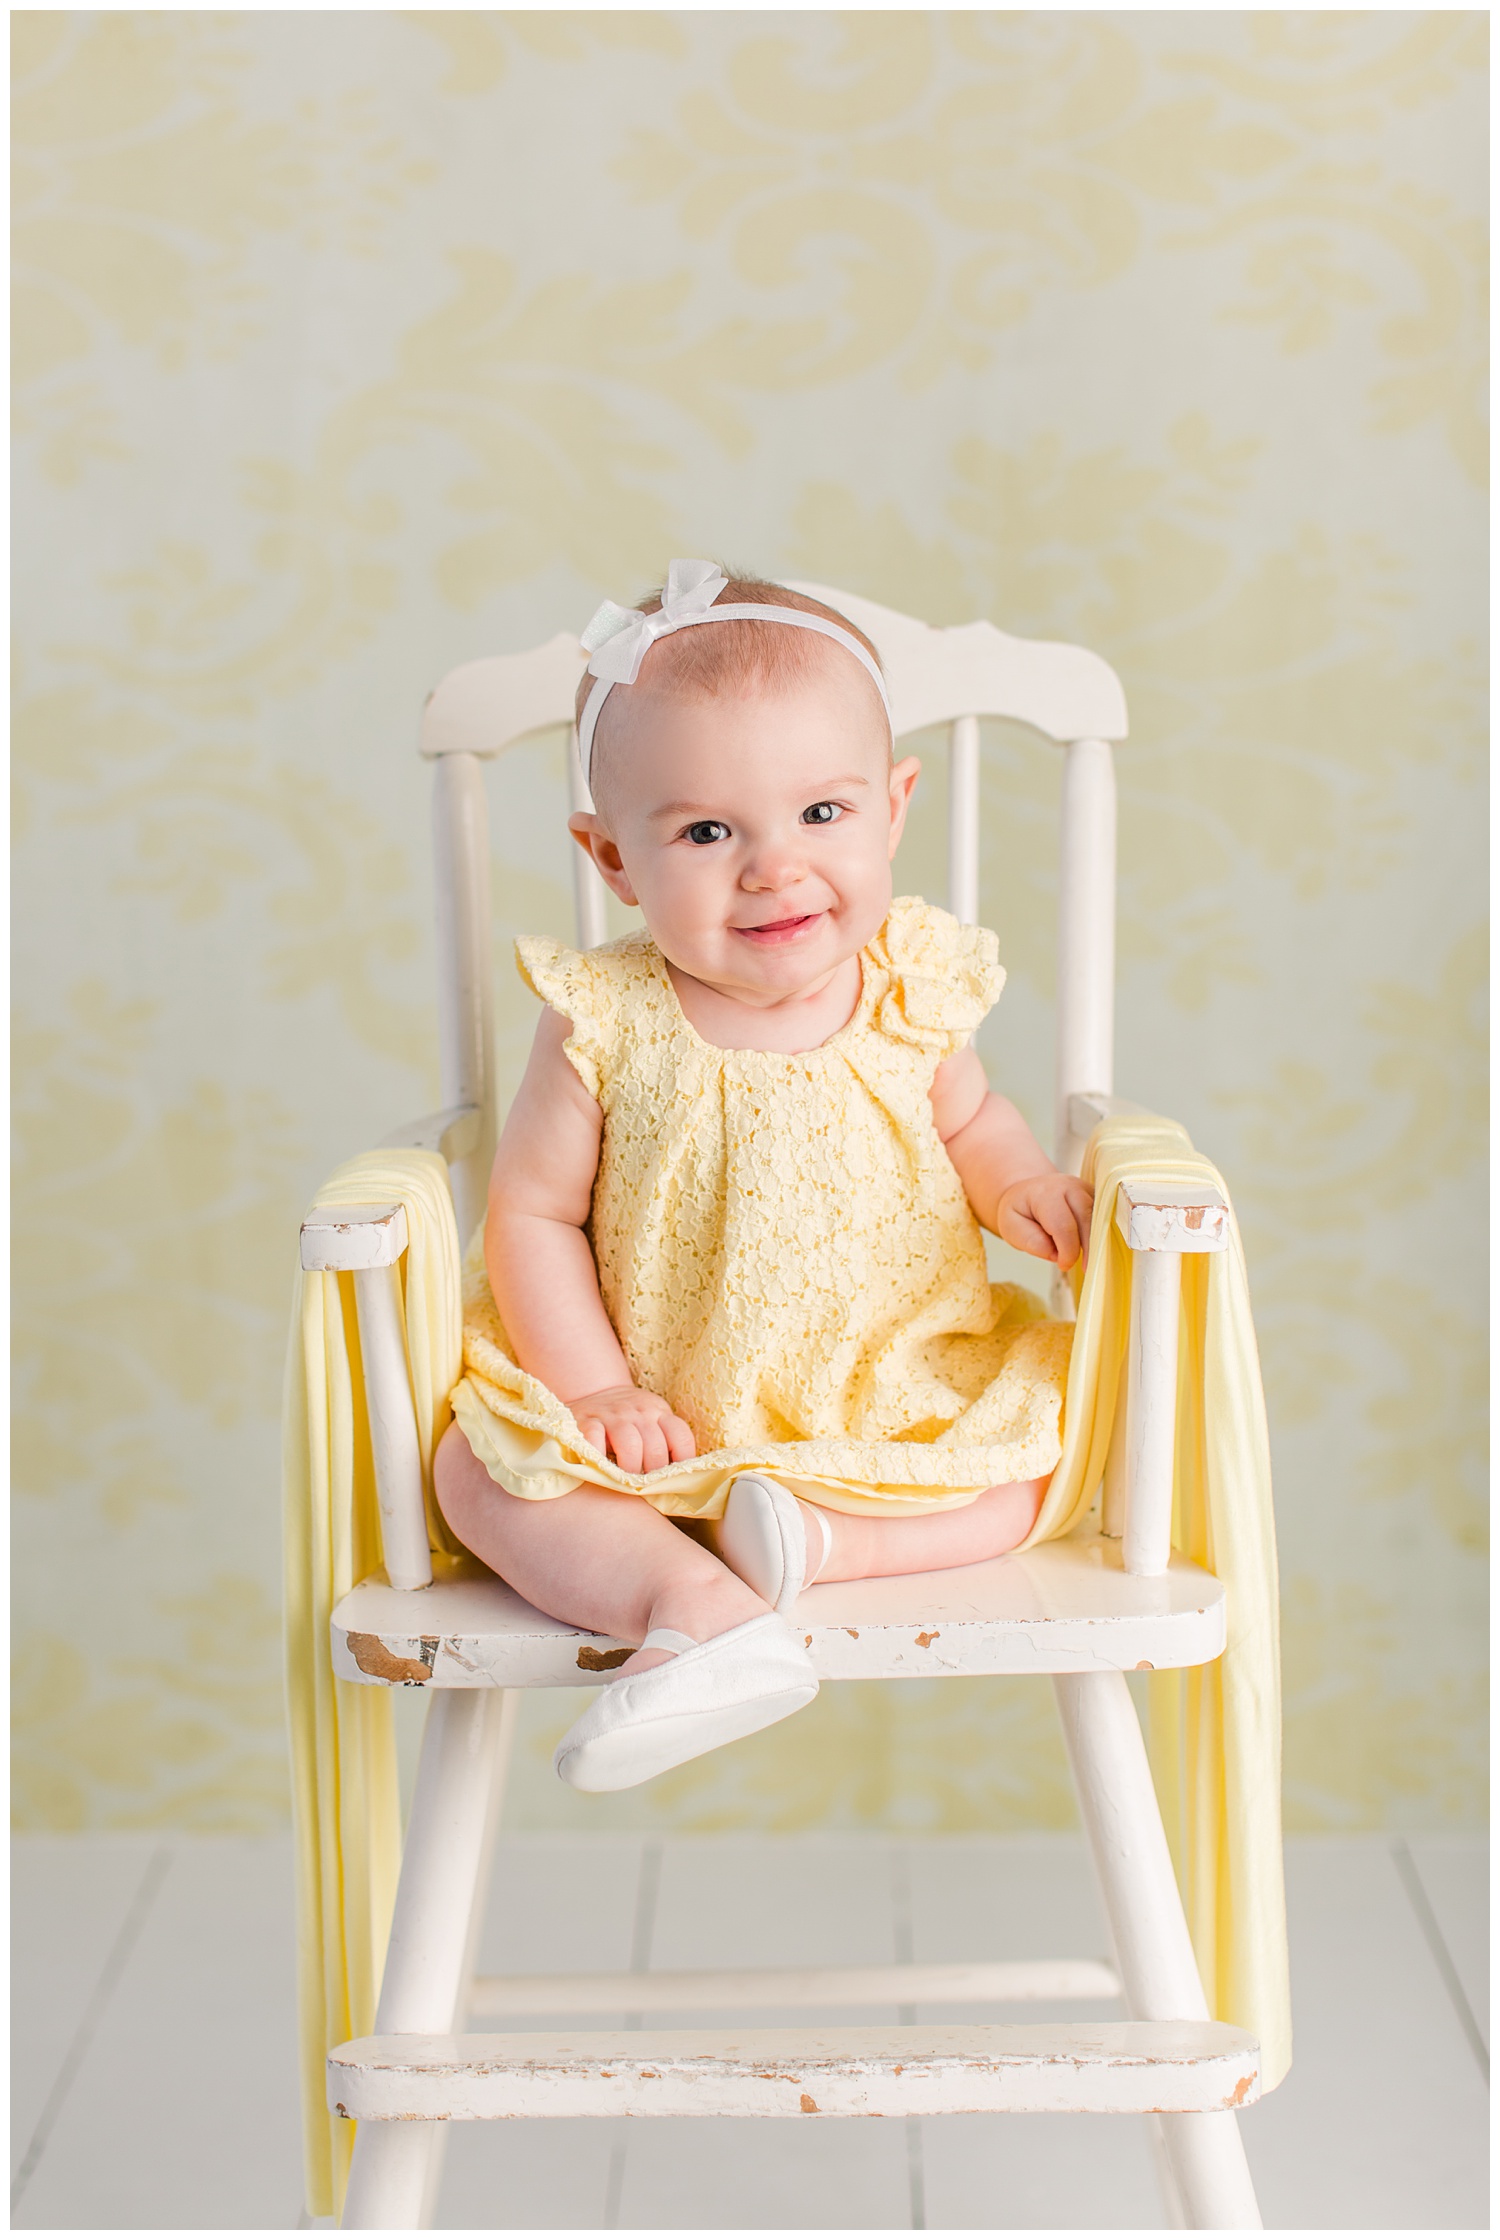 Baby Nora poses in her yellow eyelet Easter dress in an antique high chair.